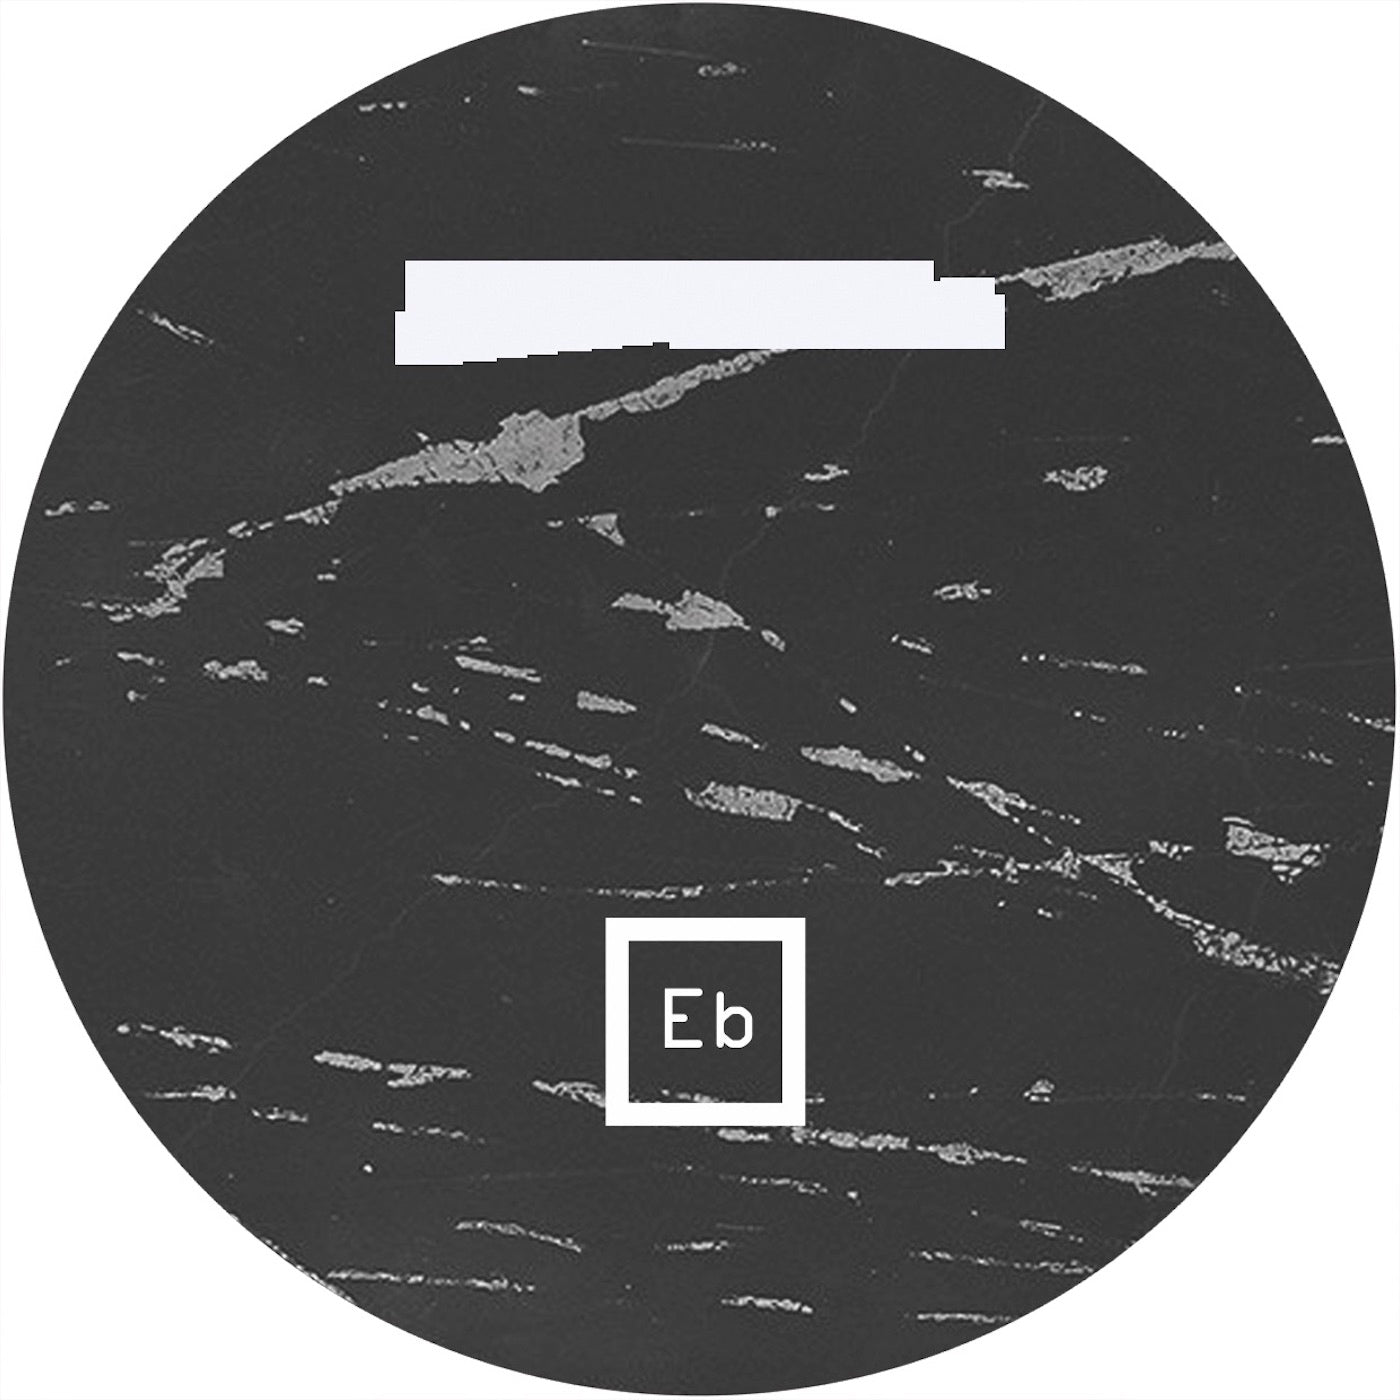 Architectural - A Girl With No Friends EP [Ellum Black]